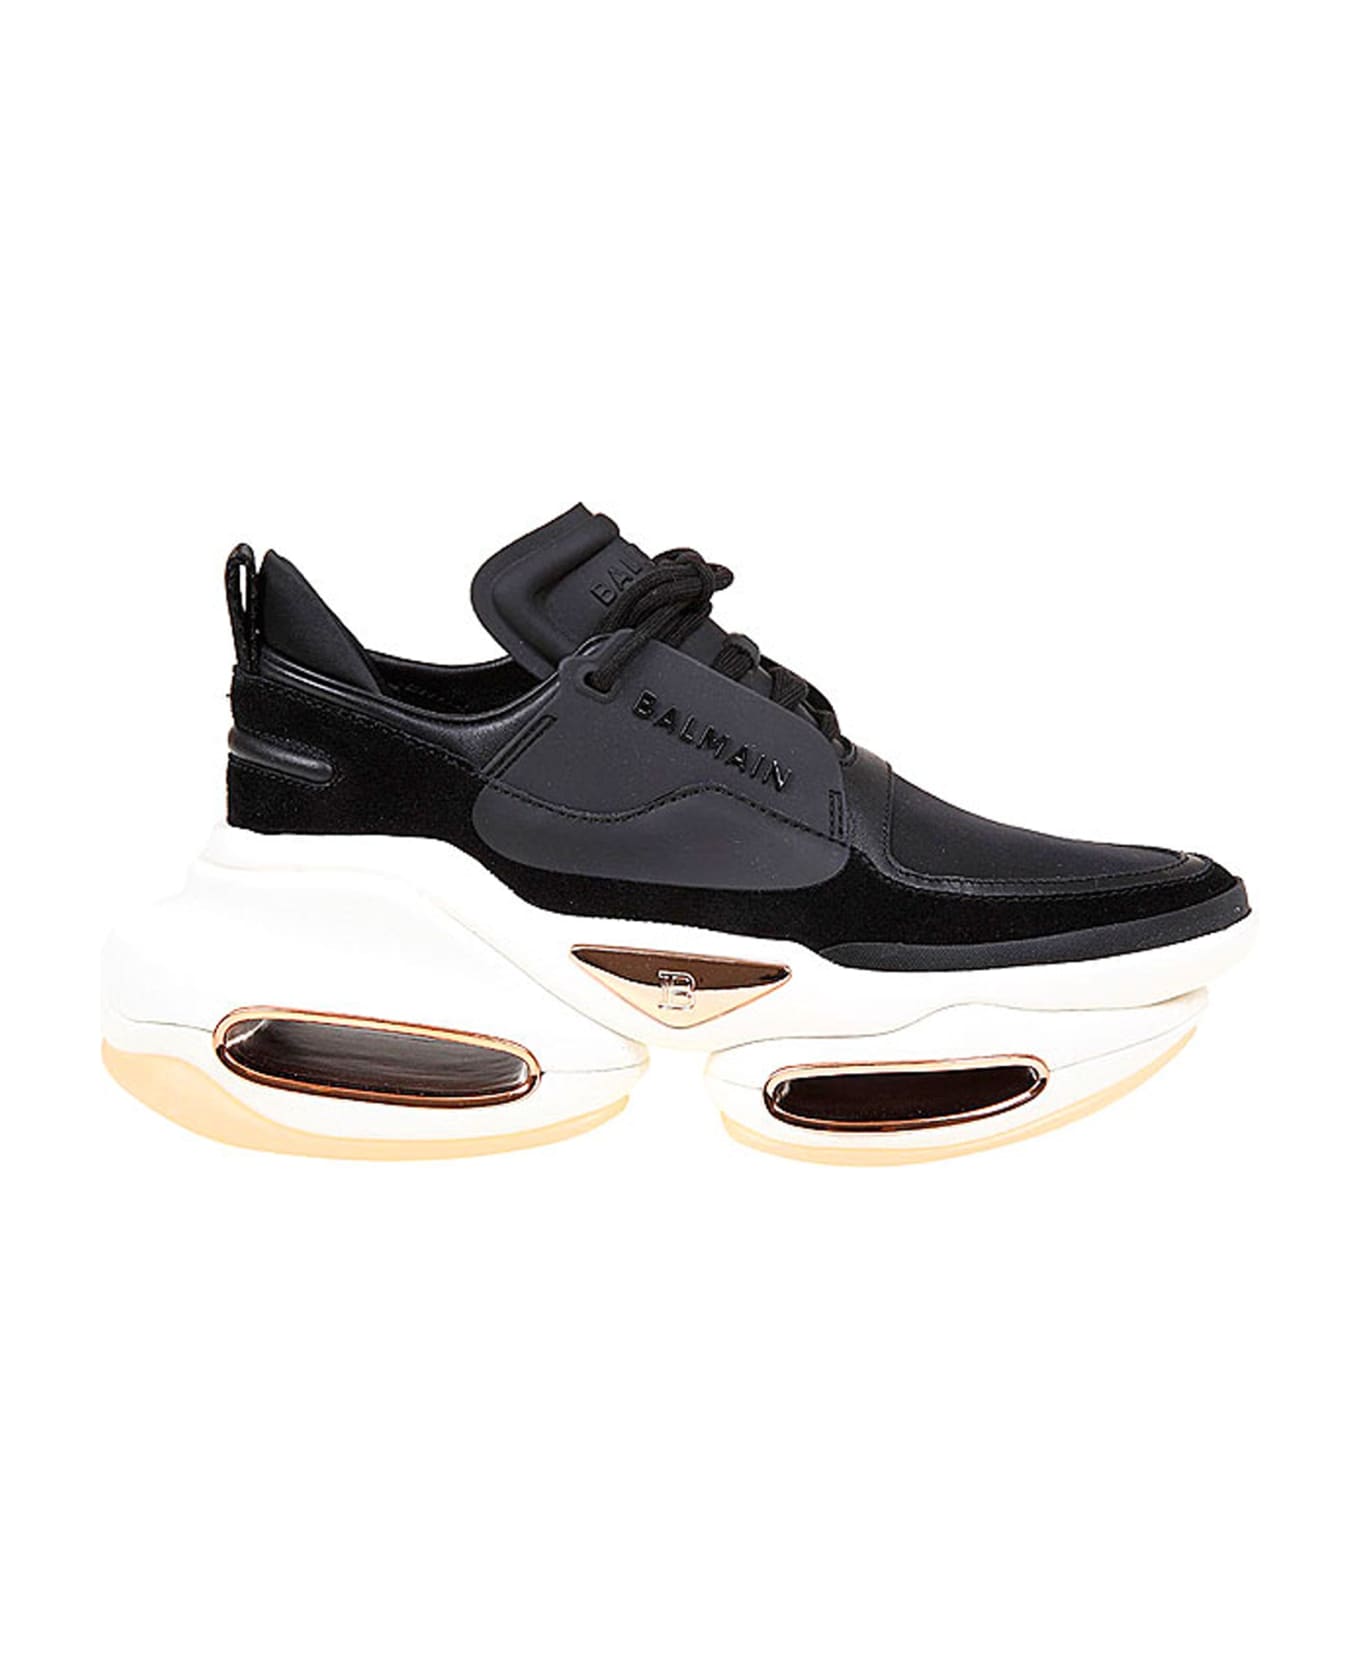 Balmain Leather And Fabric Sneakers - Black スニーカー